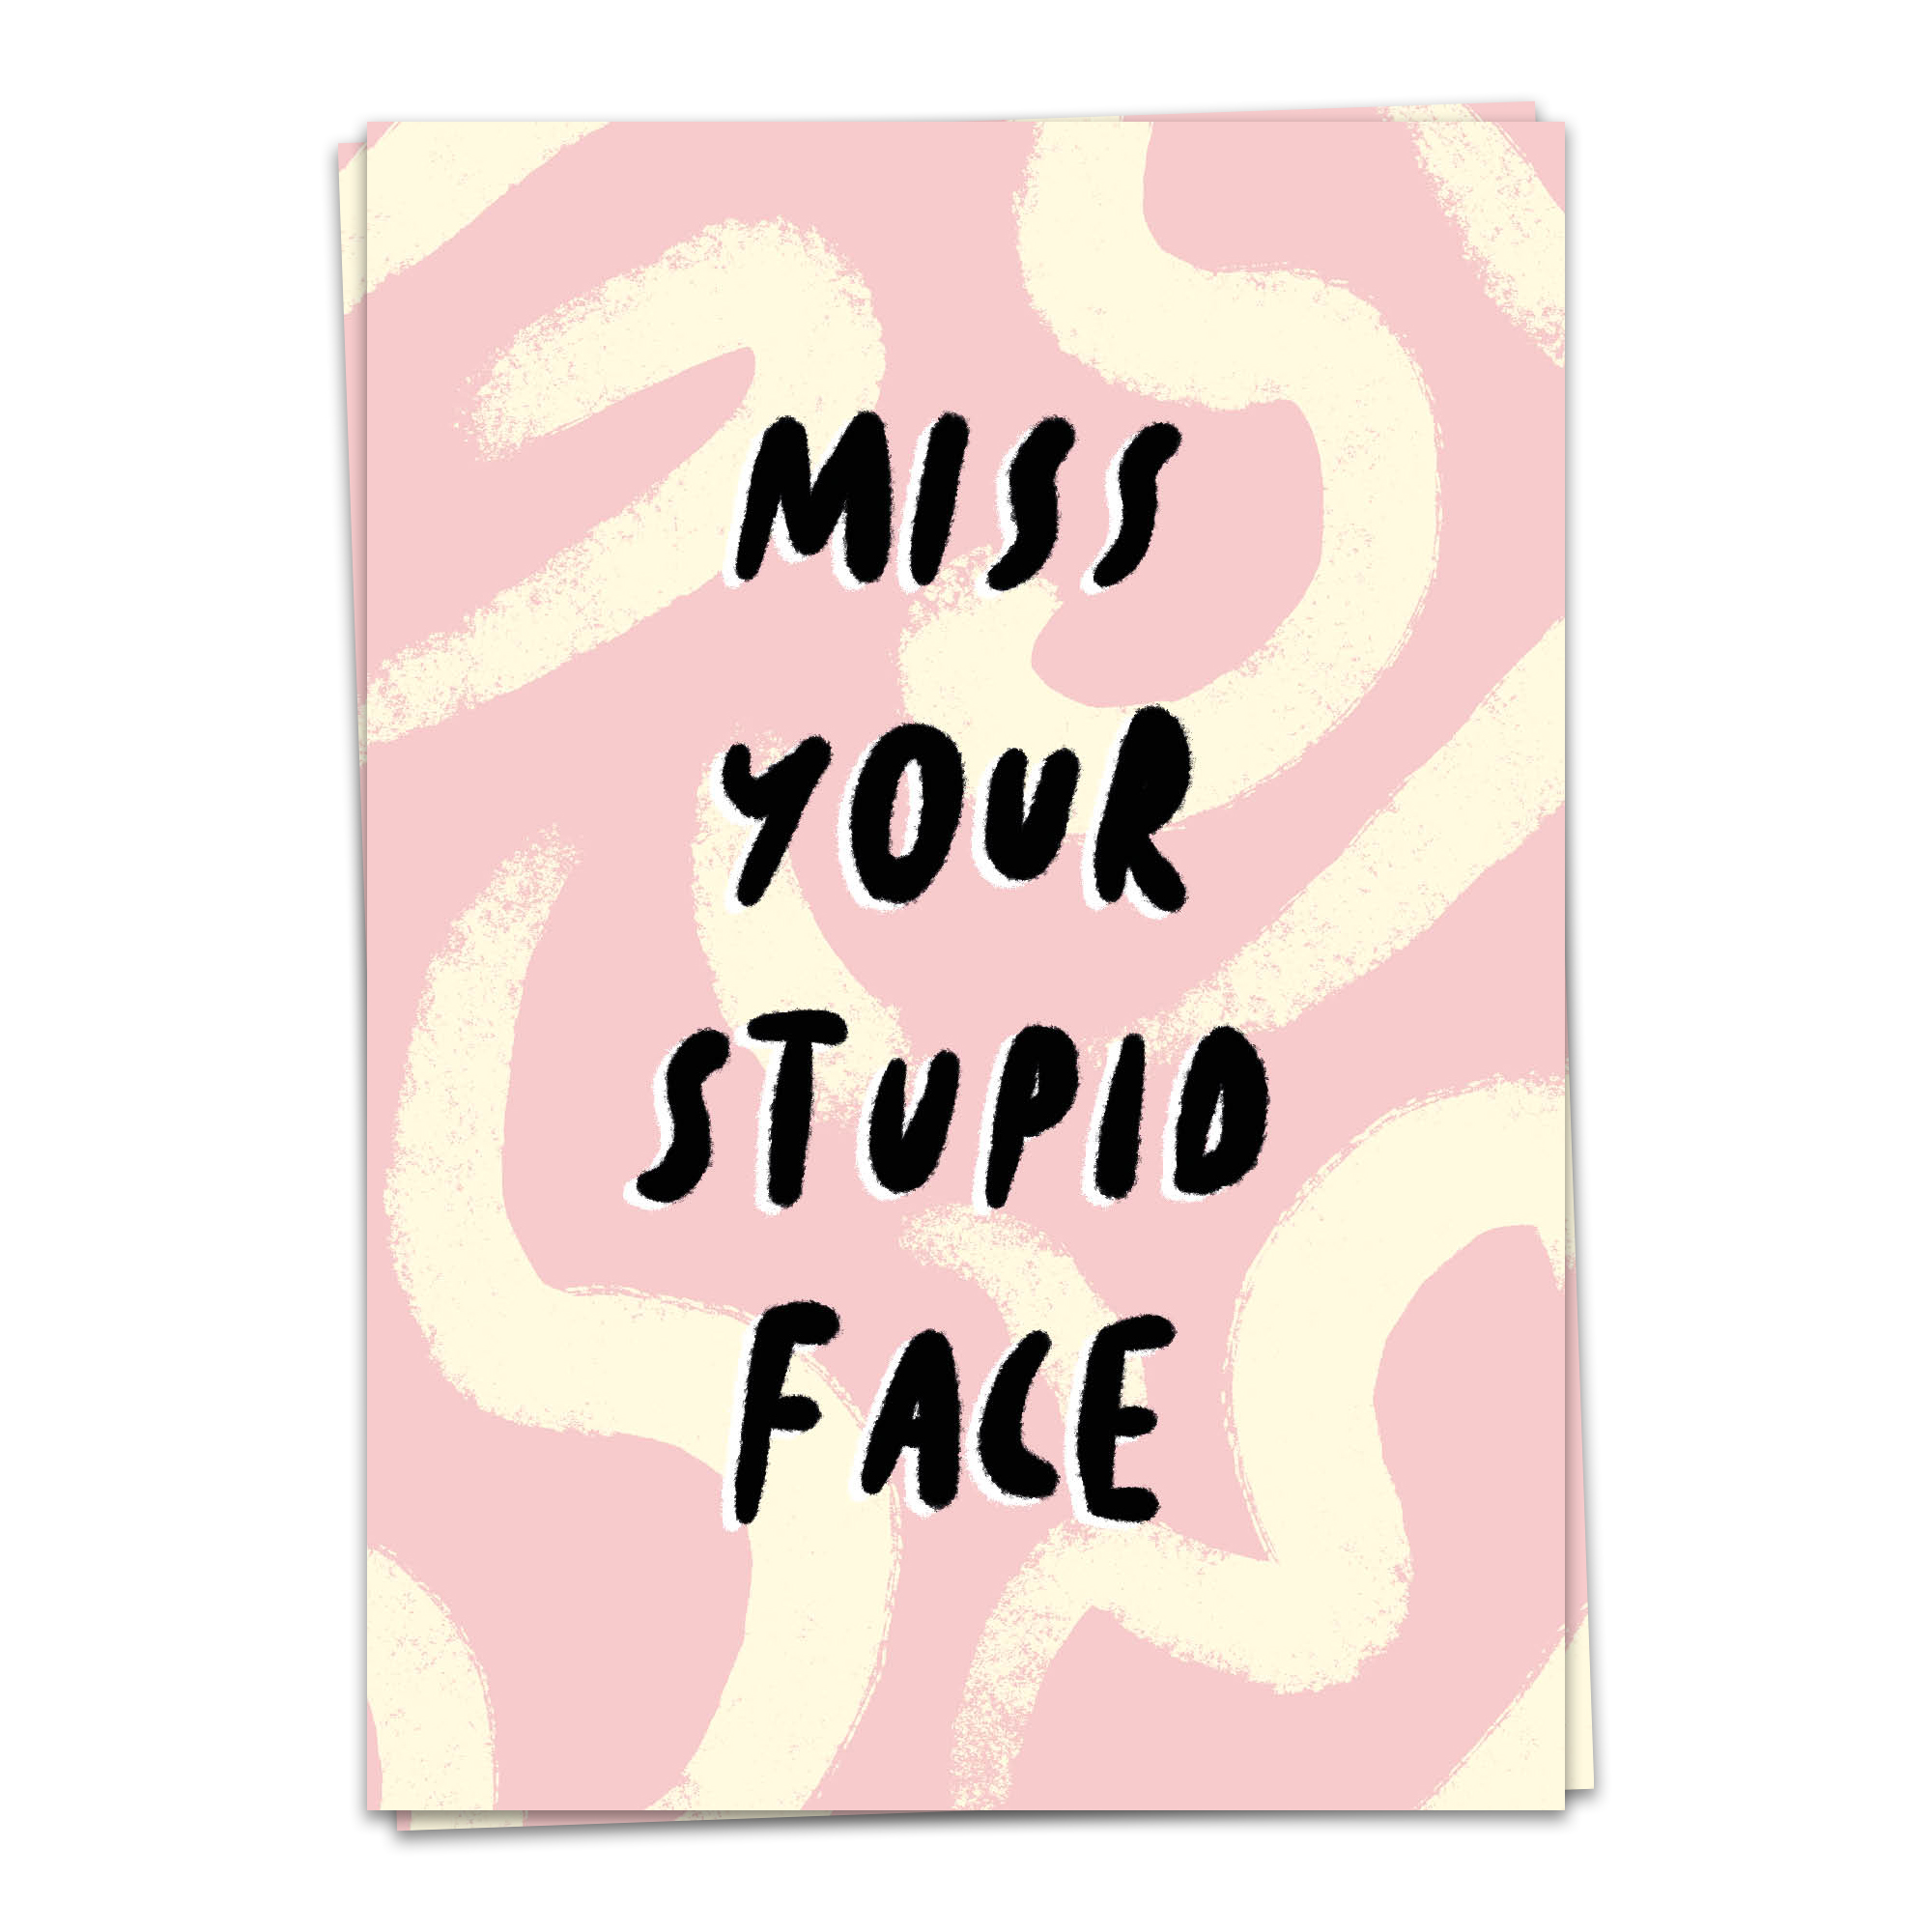 BFF - stupid face